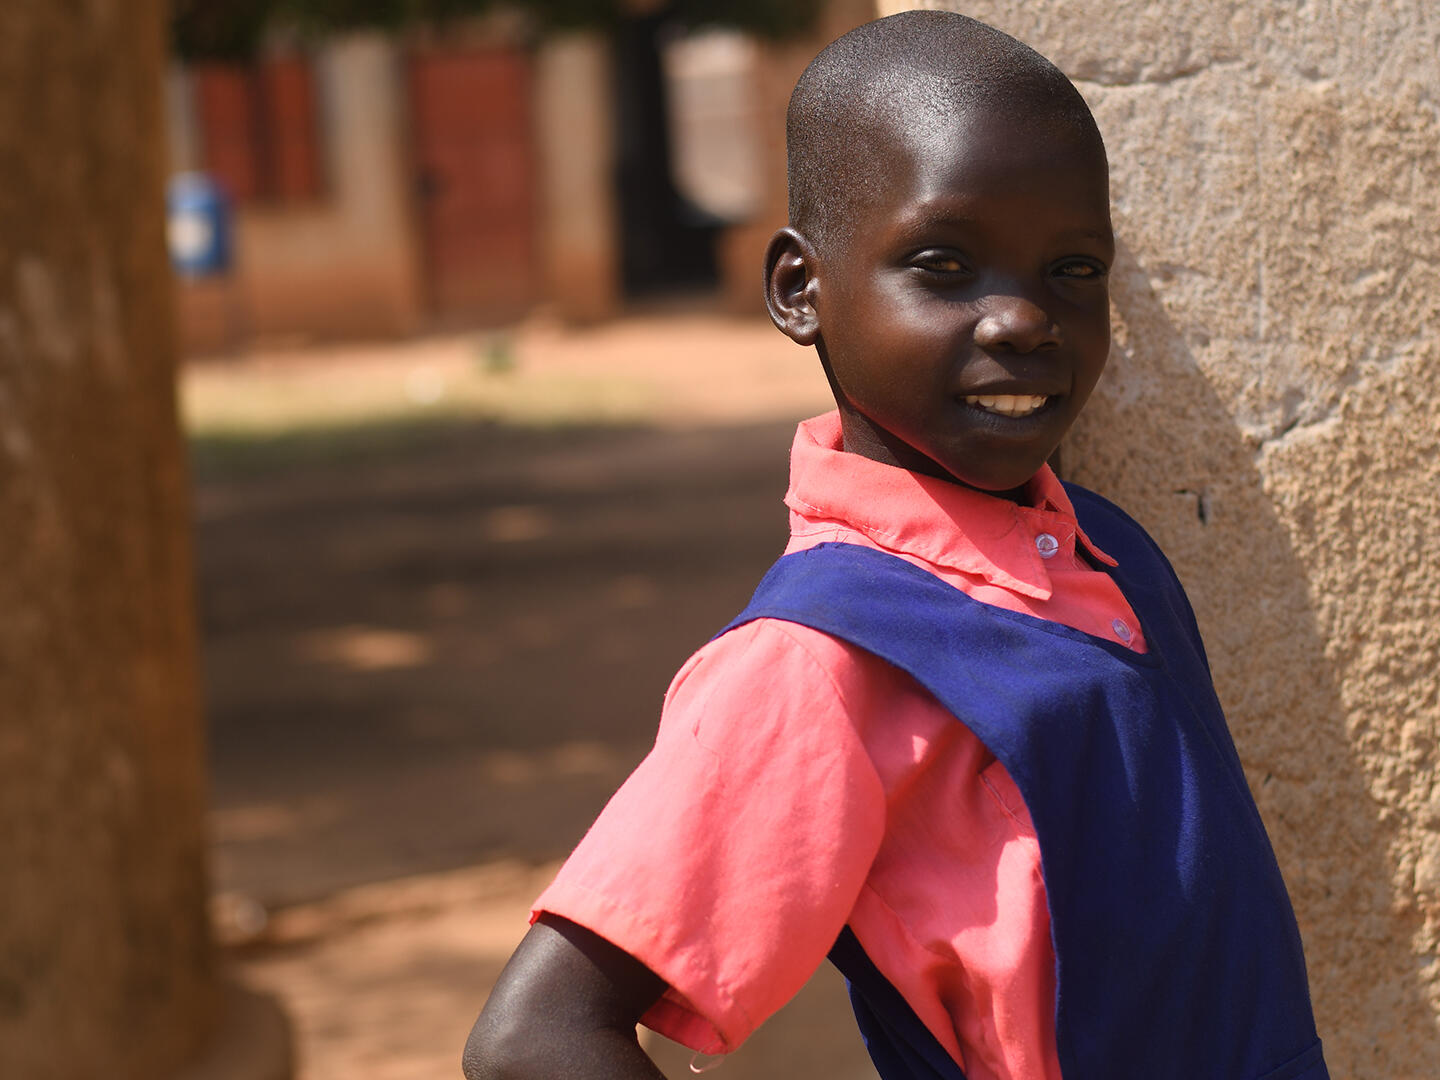 Immaculate, 10, standing outside her school in Uganda smiling at the camera